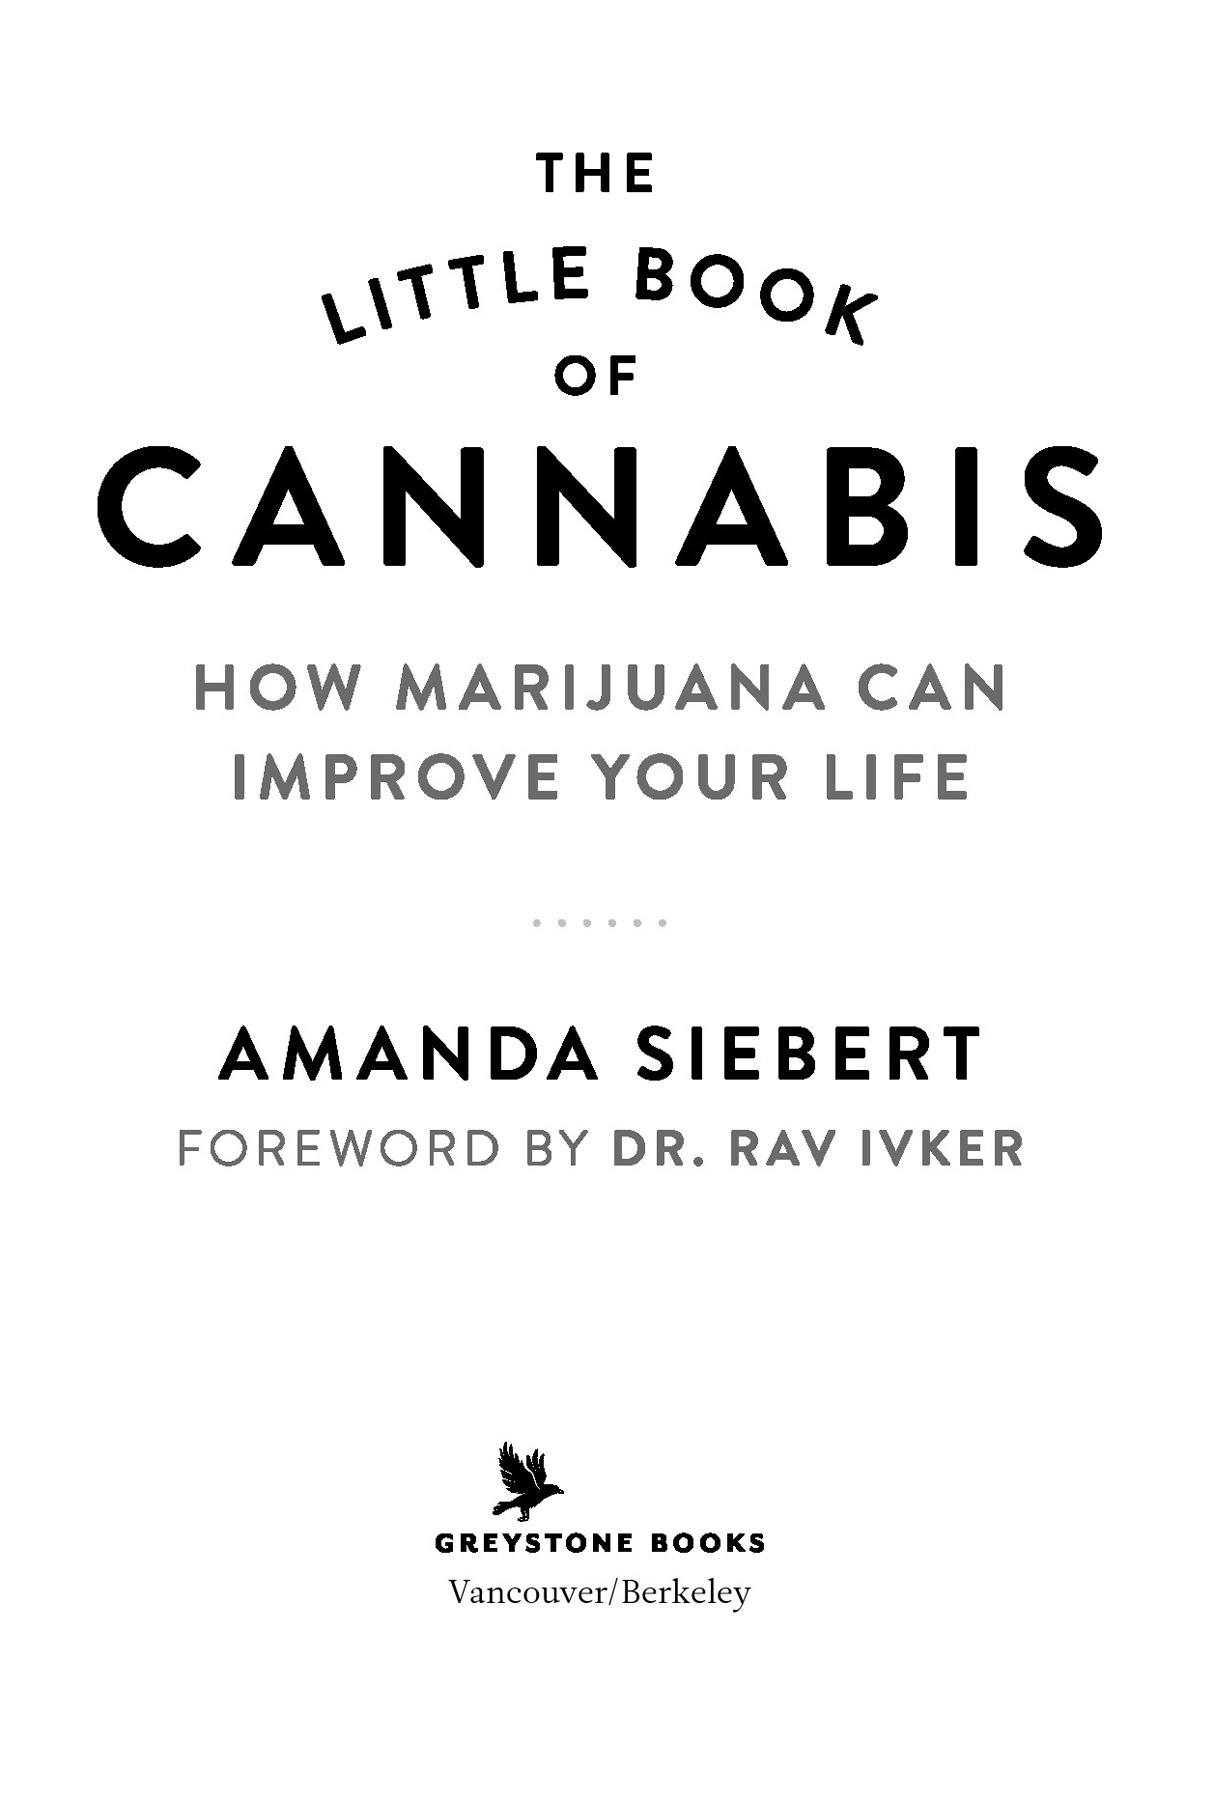 The little book of cannabis how marijuana can improve your life - image 2